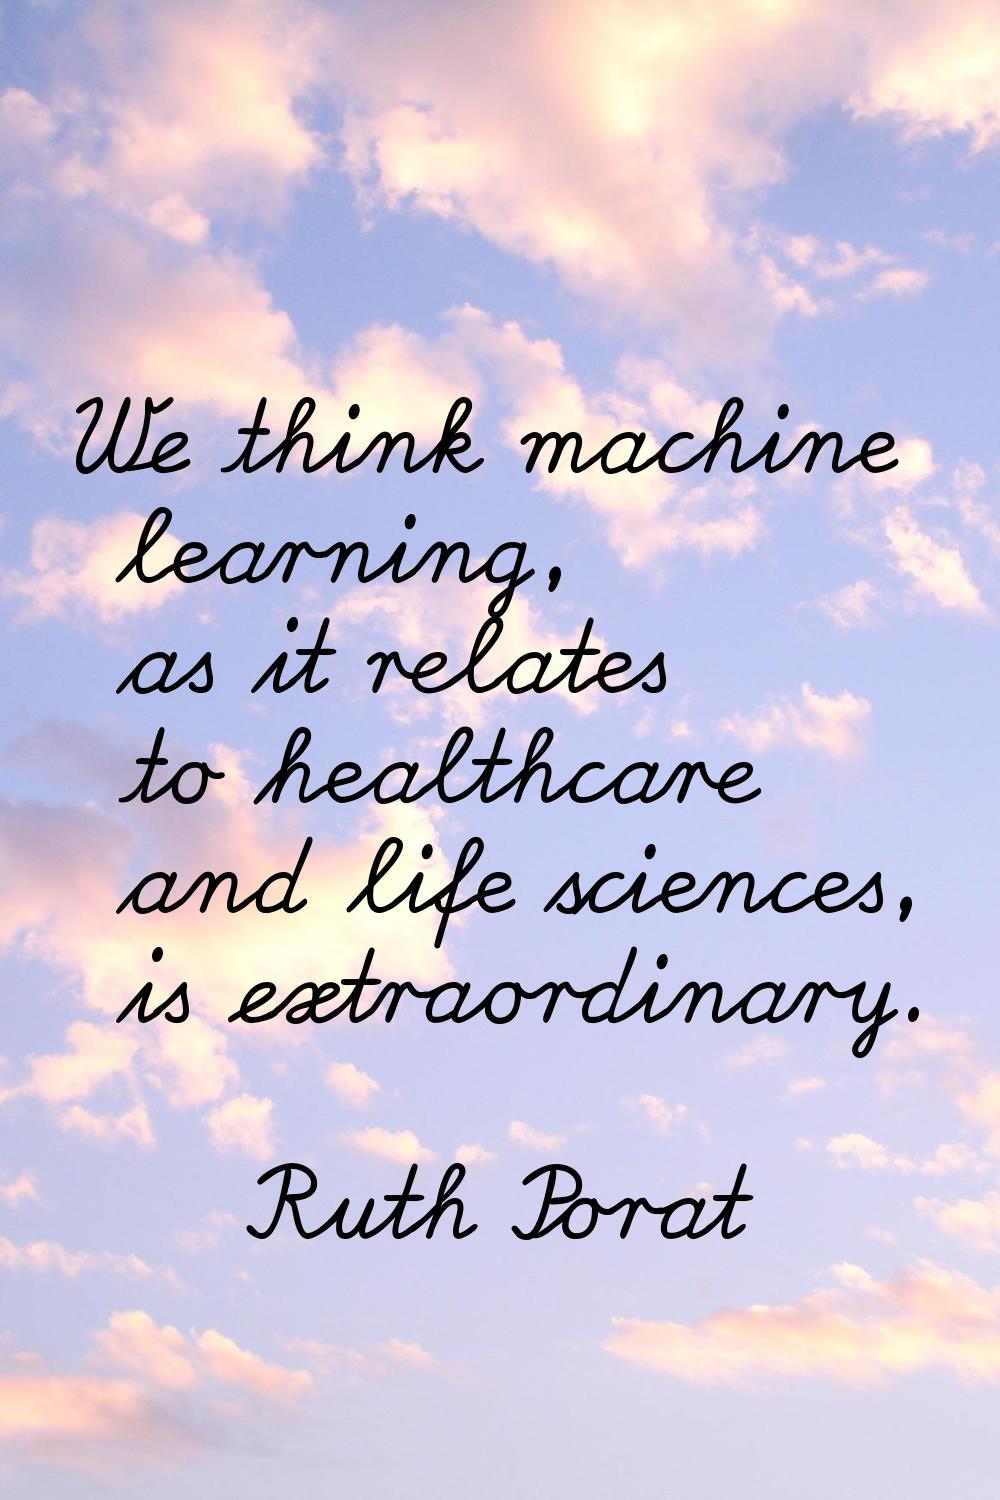 We think machine learning, as it relates to healthcare and life sciences, is extraordinary.